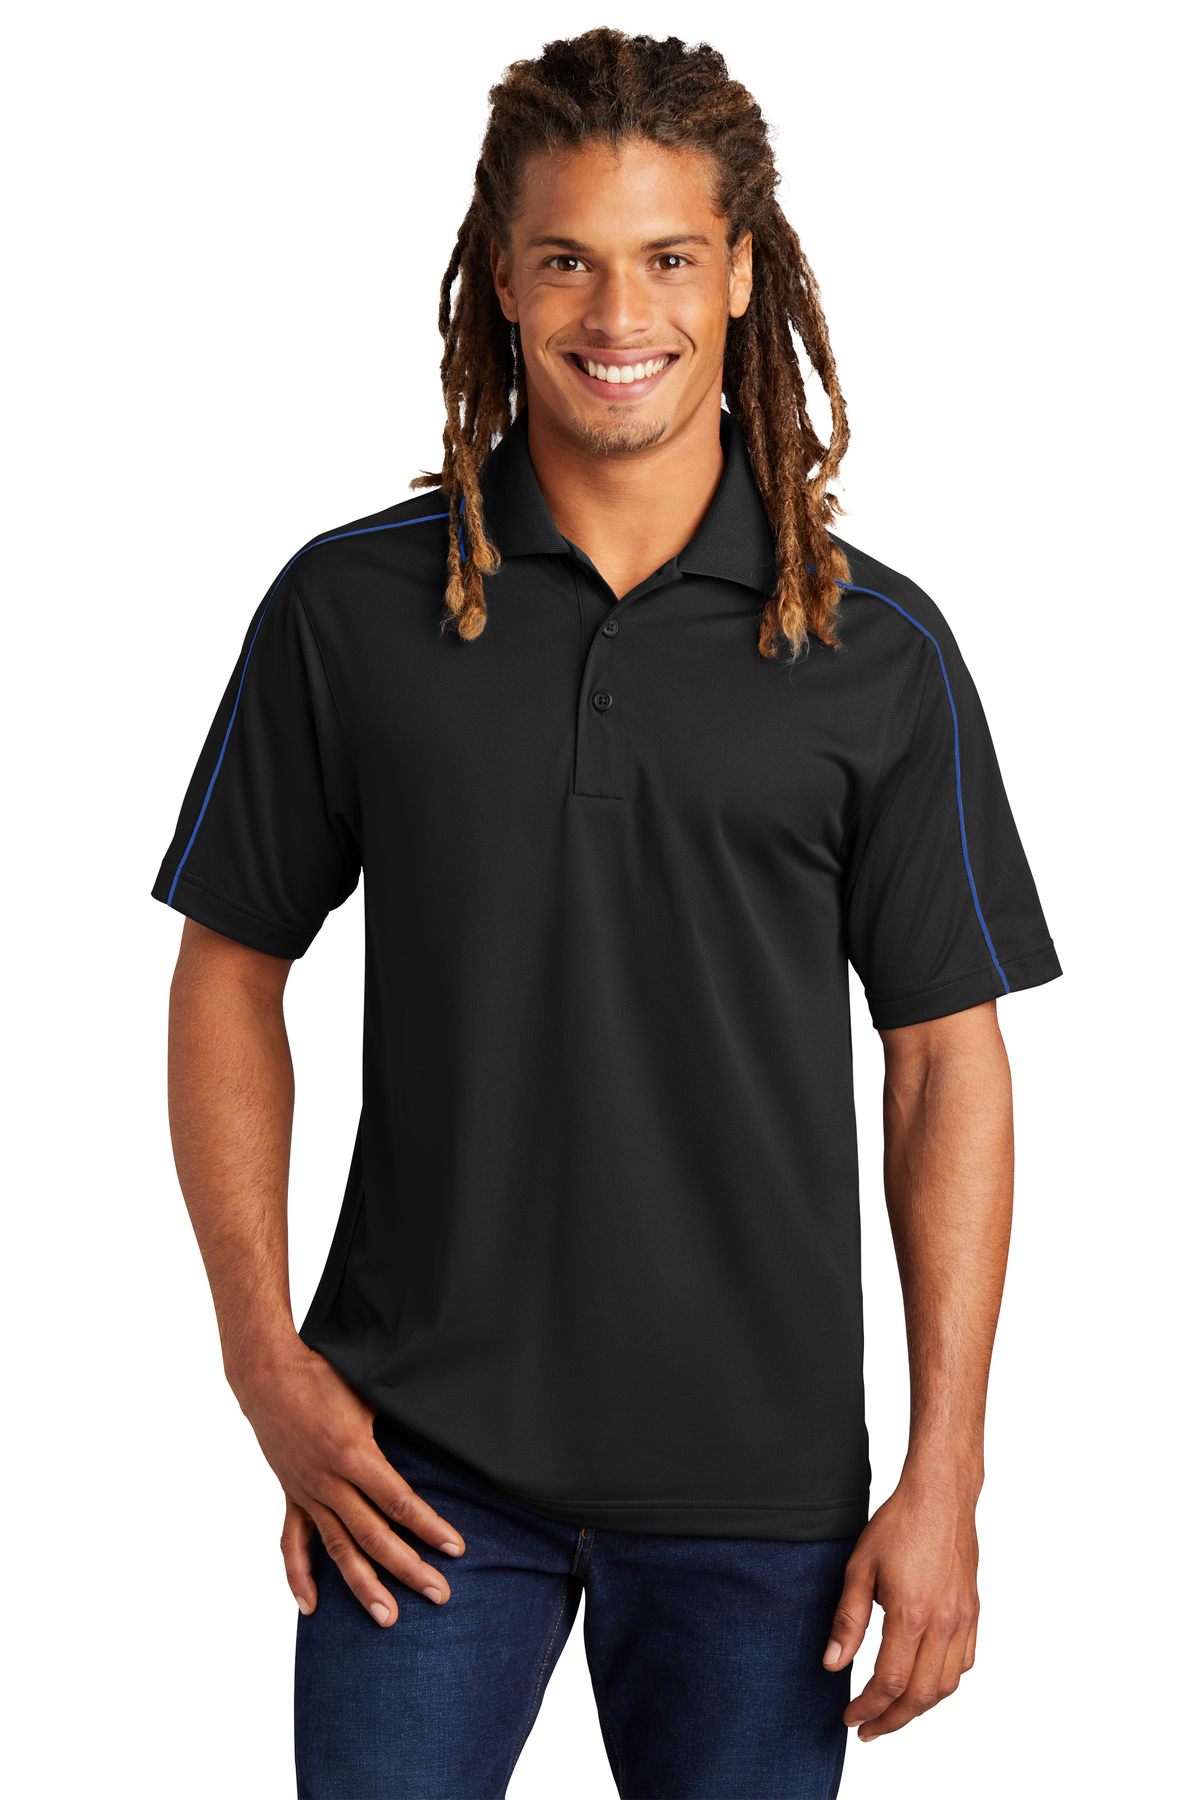 Sport-Tek Ladies Micropique Sport-Wick Piped Polo. Lst653